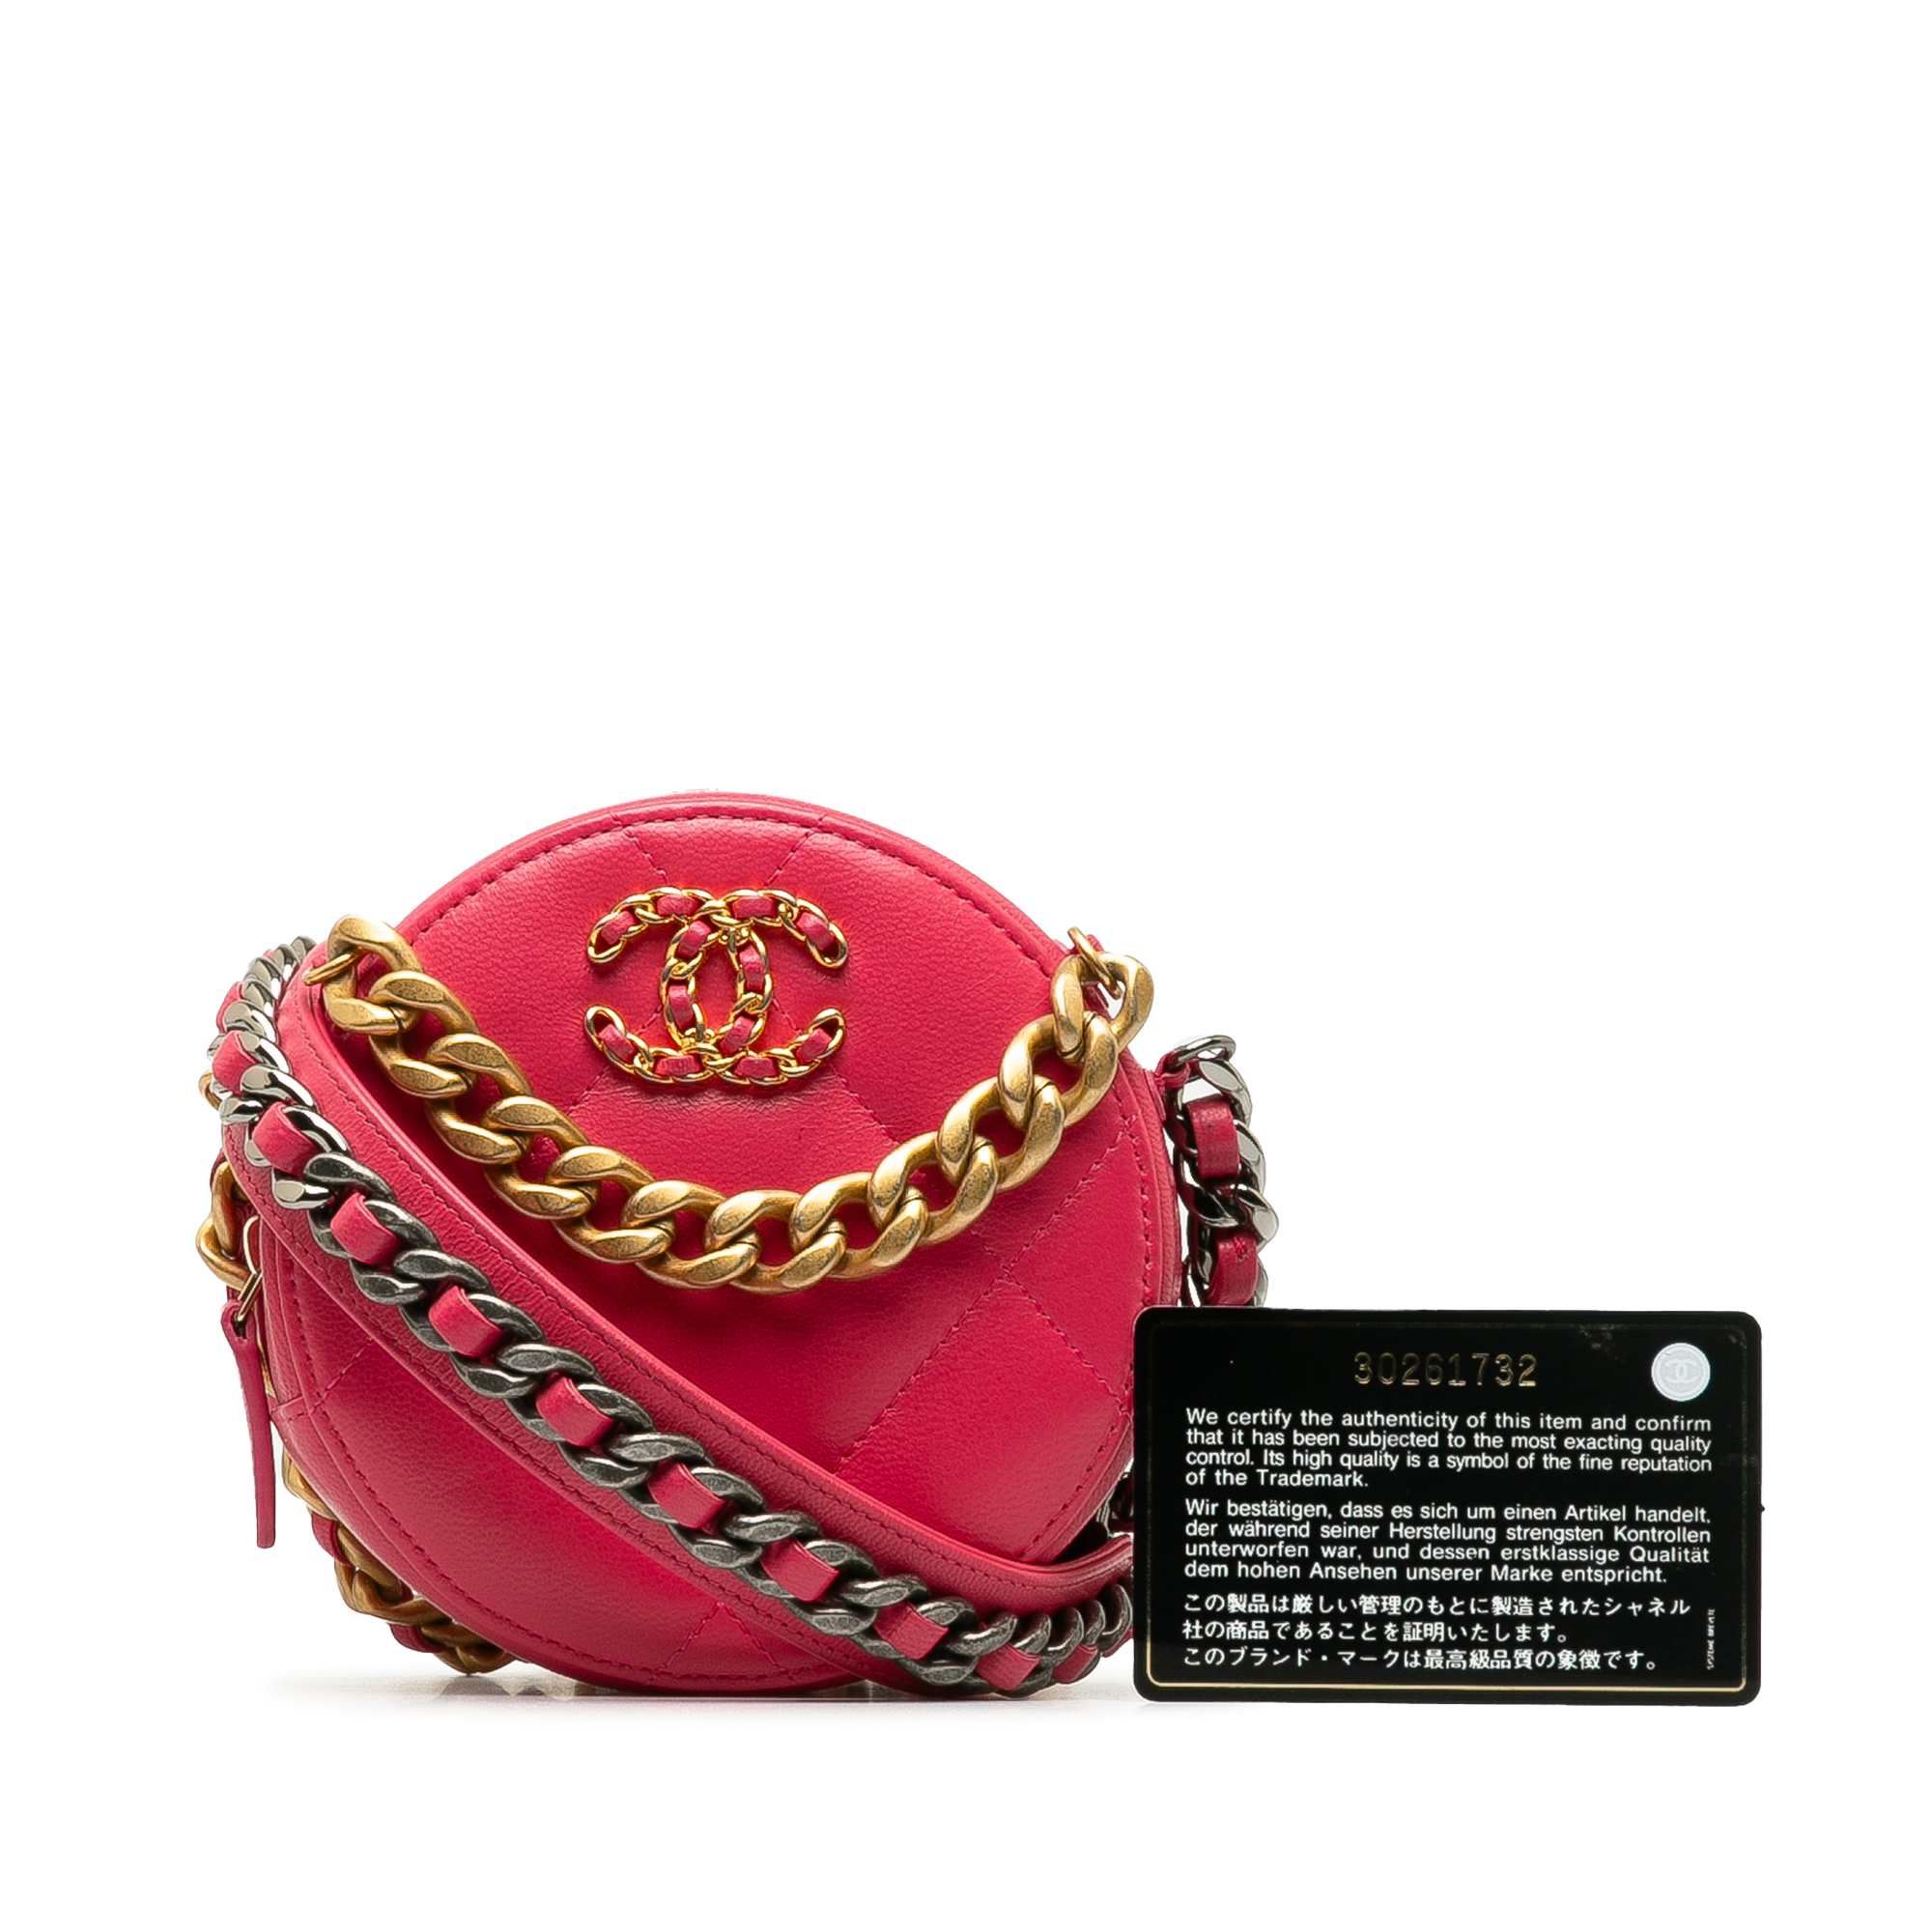 Chanel 19 Round Lambskin Clutch With Chain - Image 10 of 10